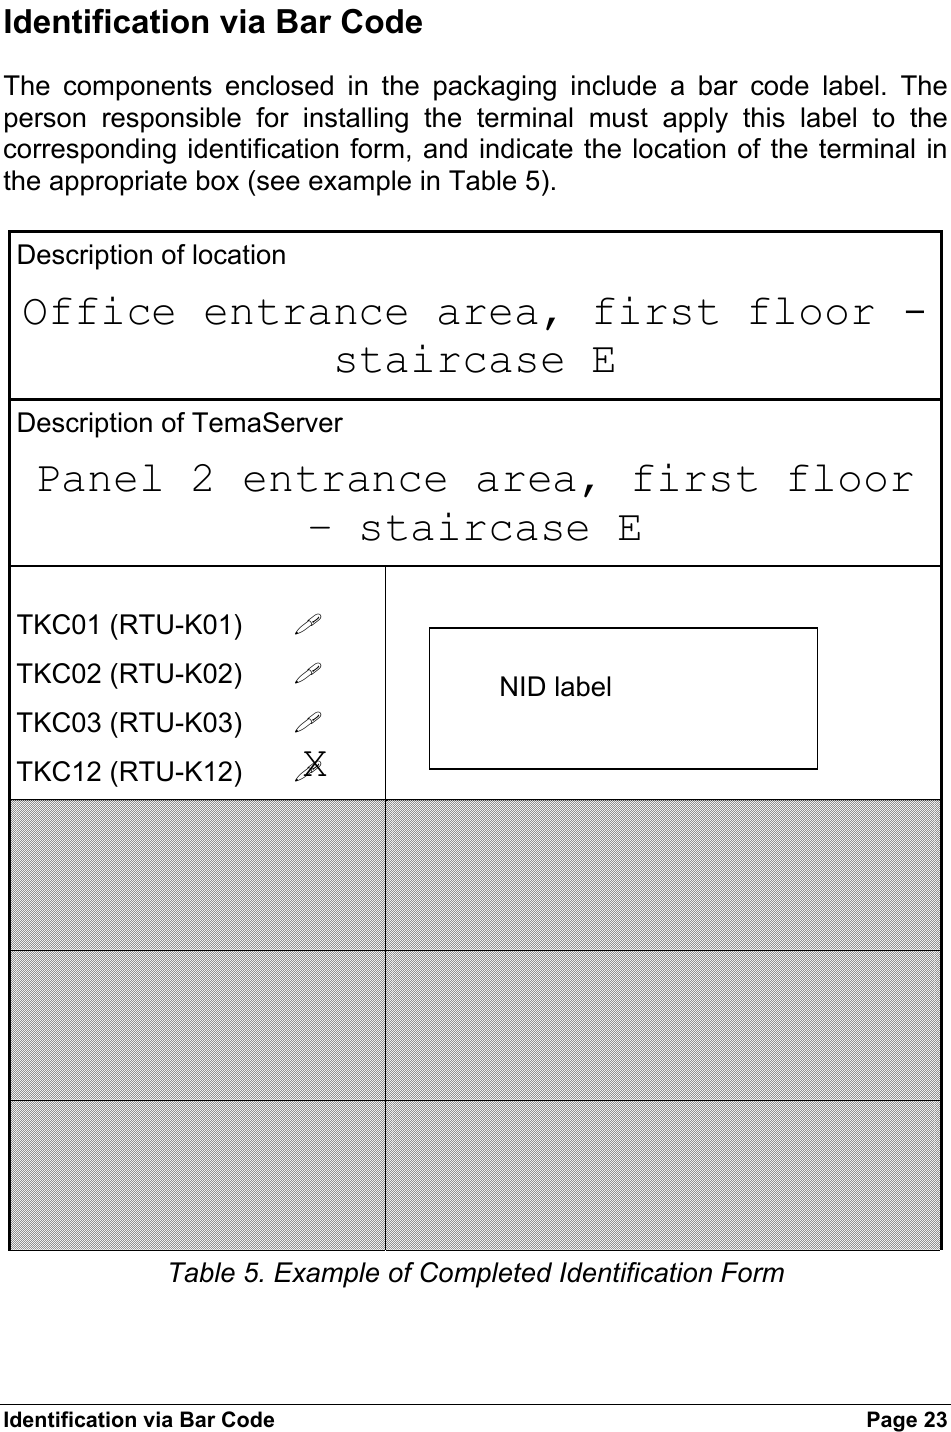 Identification via Bar Code  Page 23 Identification via Bar Code The components enclosed in the packaging include a bar code label. The person responsible for installing the terminal must apply this label to the corresponding identification form, and indicate the location of the terminal in the appropriate box (see example in Table 5).  Description of location Office entrance area, first floor -staircase E Description of TemaServer Panel 2 entrance area, first floor – staircase E  TKC01 (RTU-K01)   TKC02 (RTU-K02)   TKC03 (RTU-K03)   TKC12 (RTU-K12)                      NID label          Table 5. Example of Completed Identification Form X 